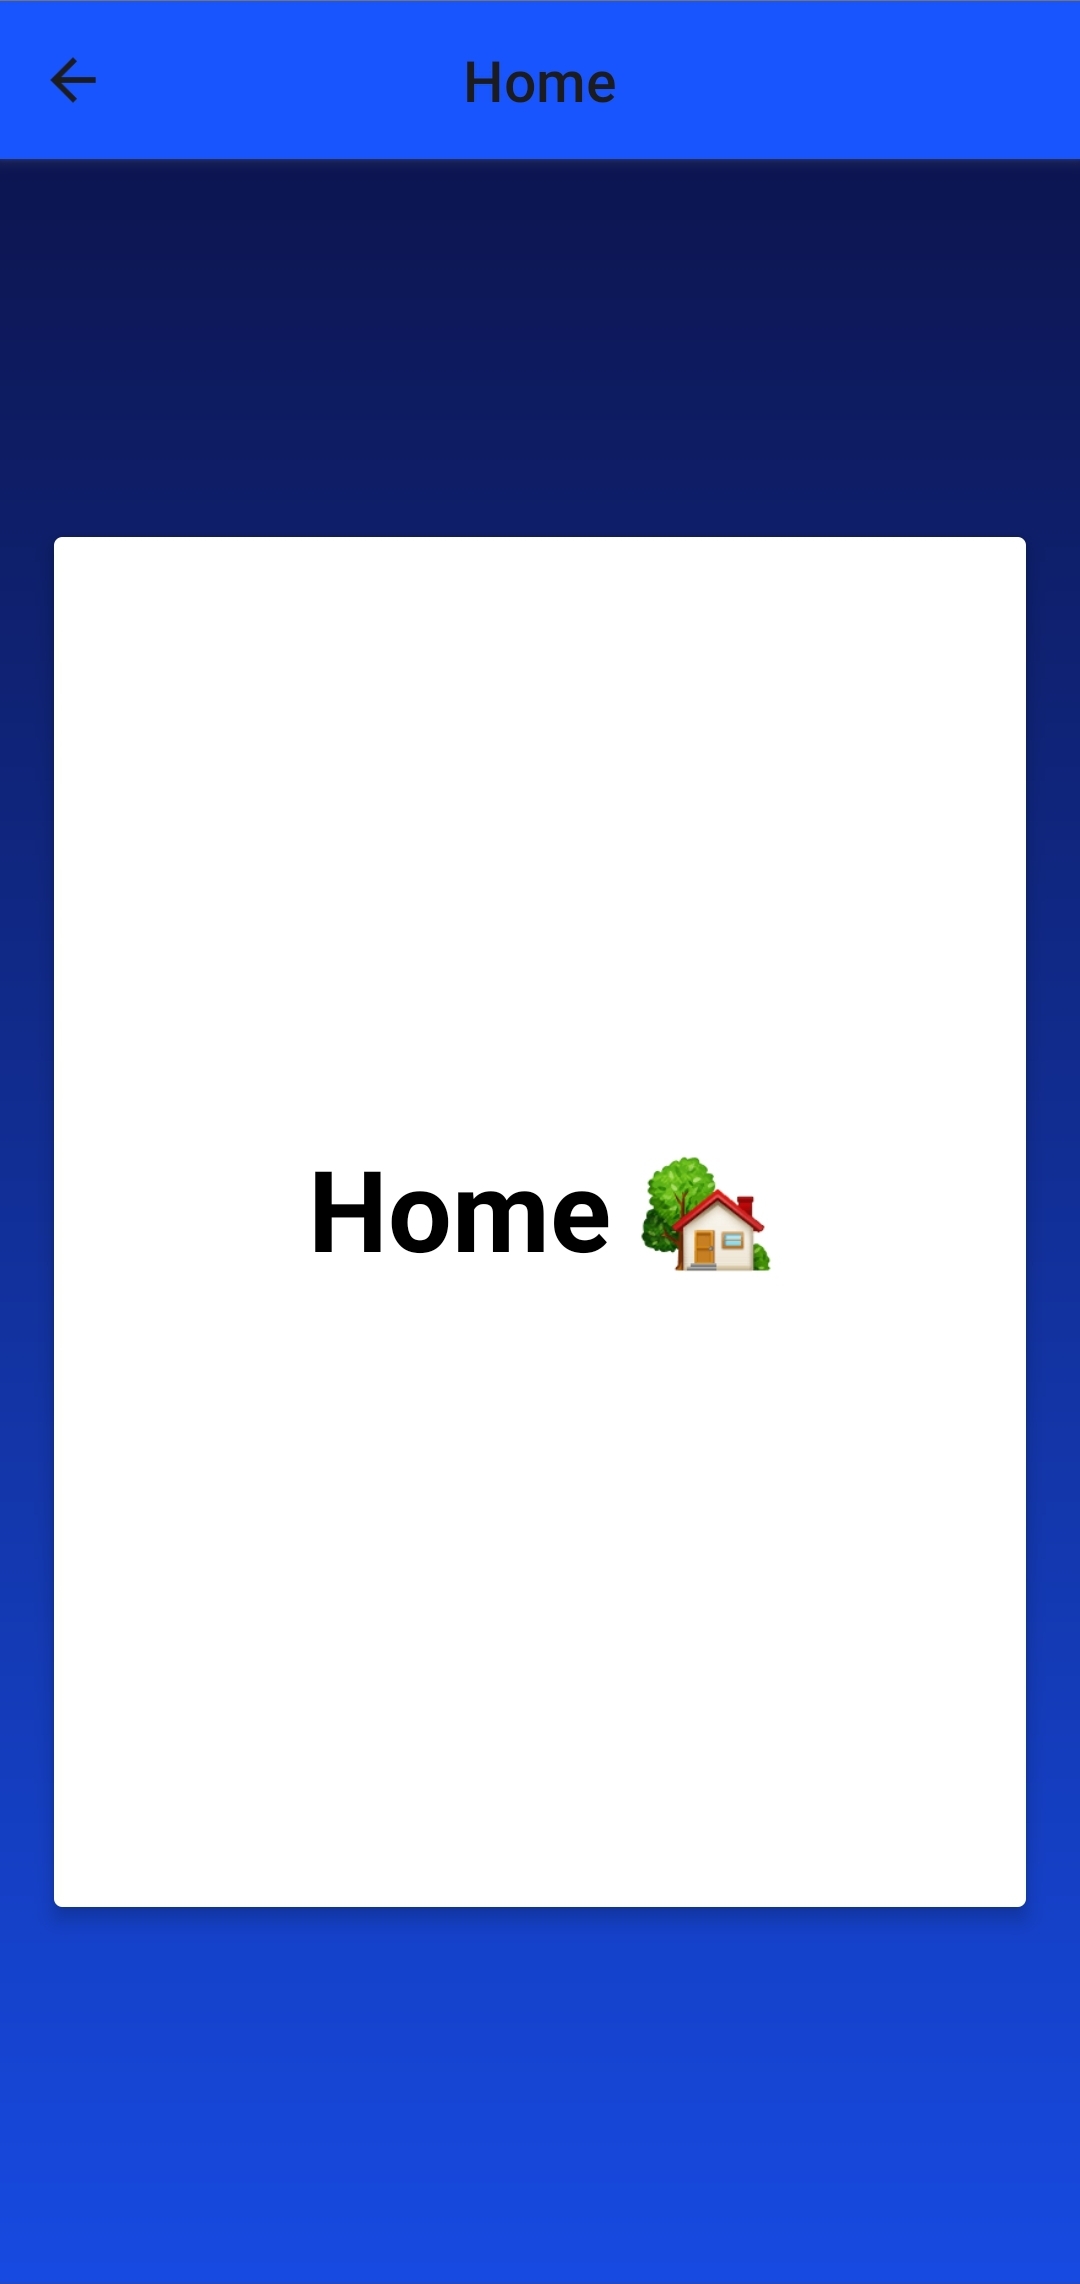 A screenshot of a mobile device running the demo tru.ID application. The background is blue with a white card over the top. On this card is an image of an animated house